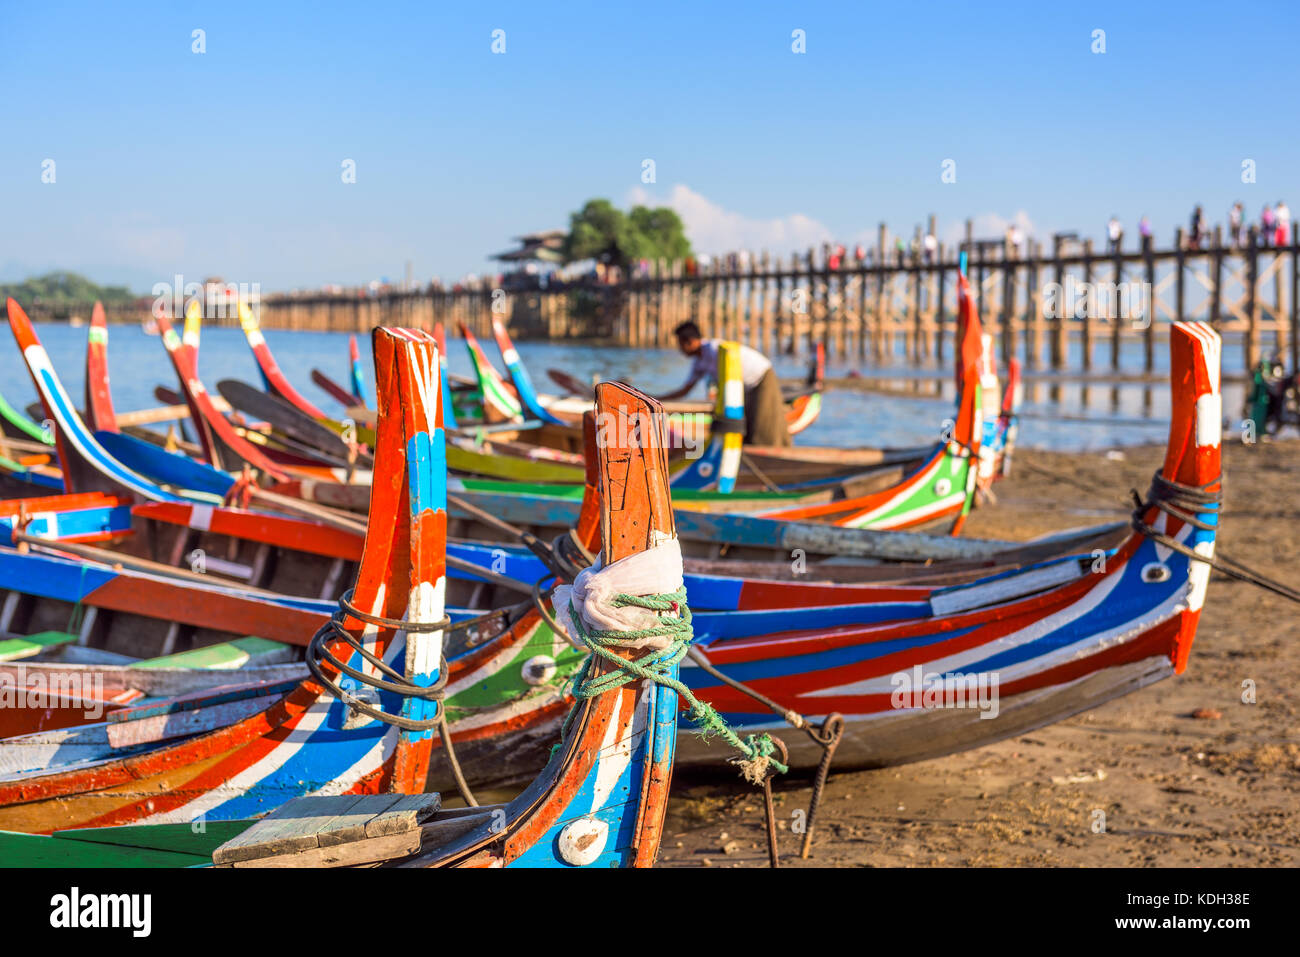 Mandalay, Myanmar boats on the Taungthaman Lake in front of U Bein Bridge. Stock Photo